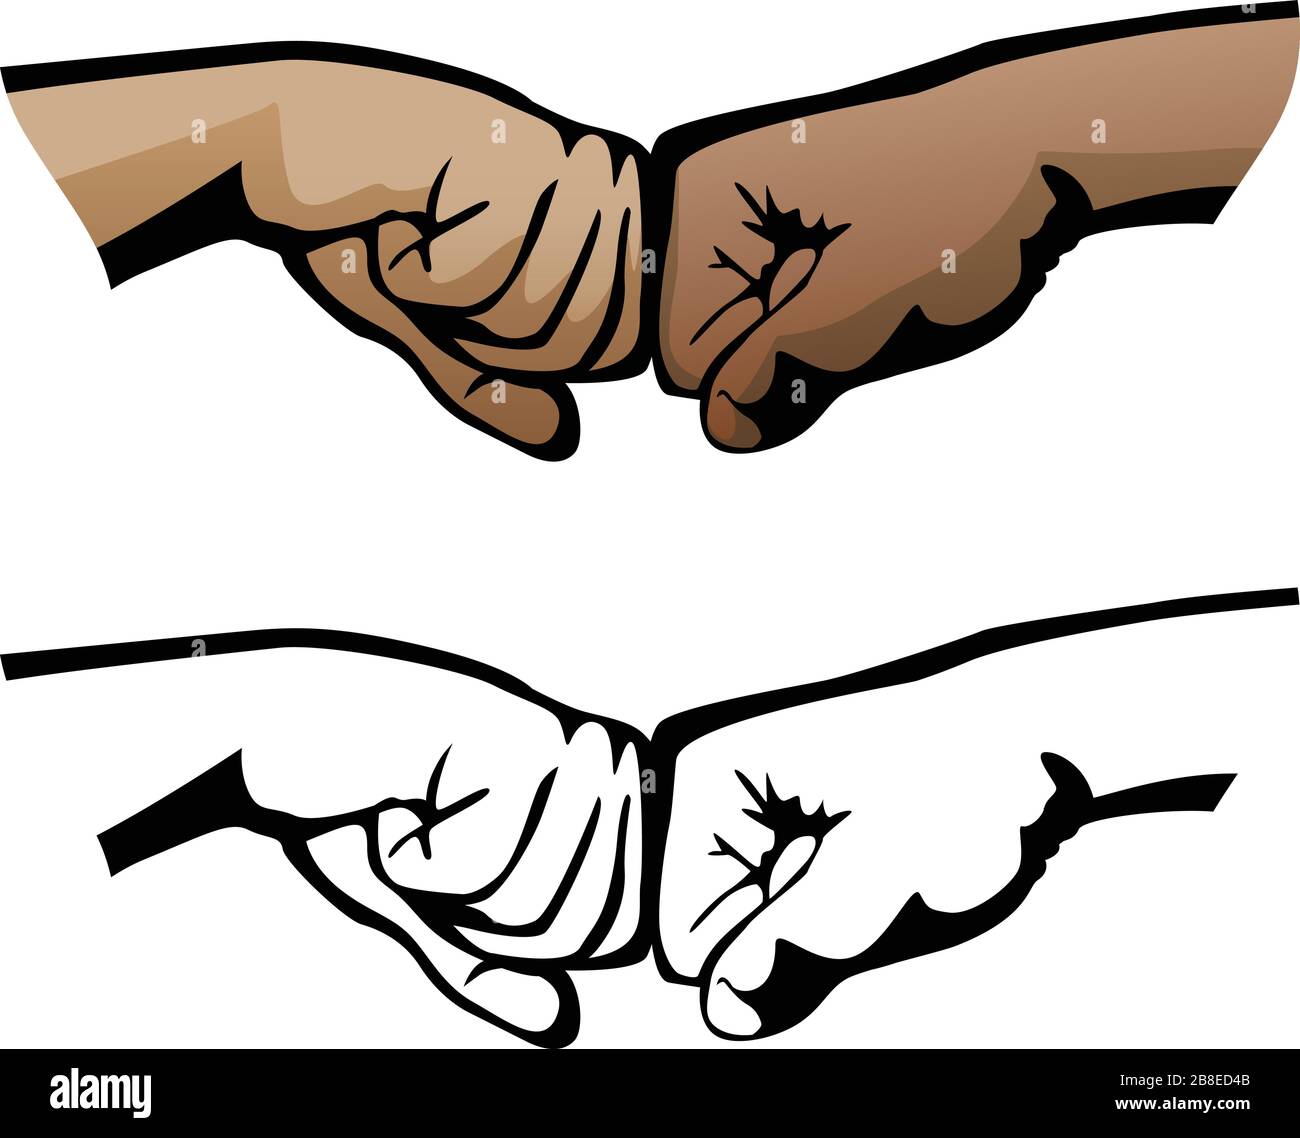 Fist Bump Healthy Diverse Hands Social Distance Greeting Symbol Isolated Vector Illustration Stock Vector